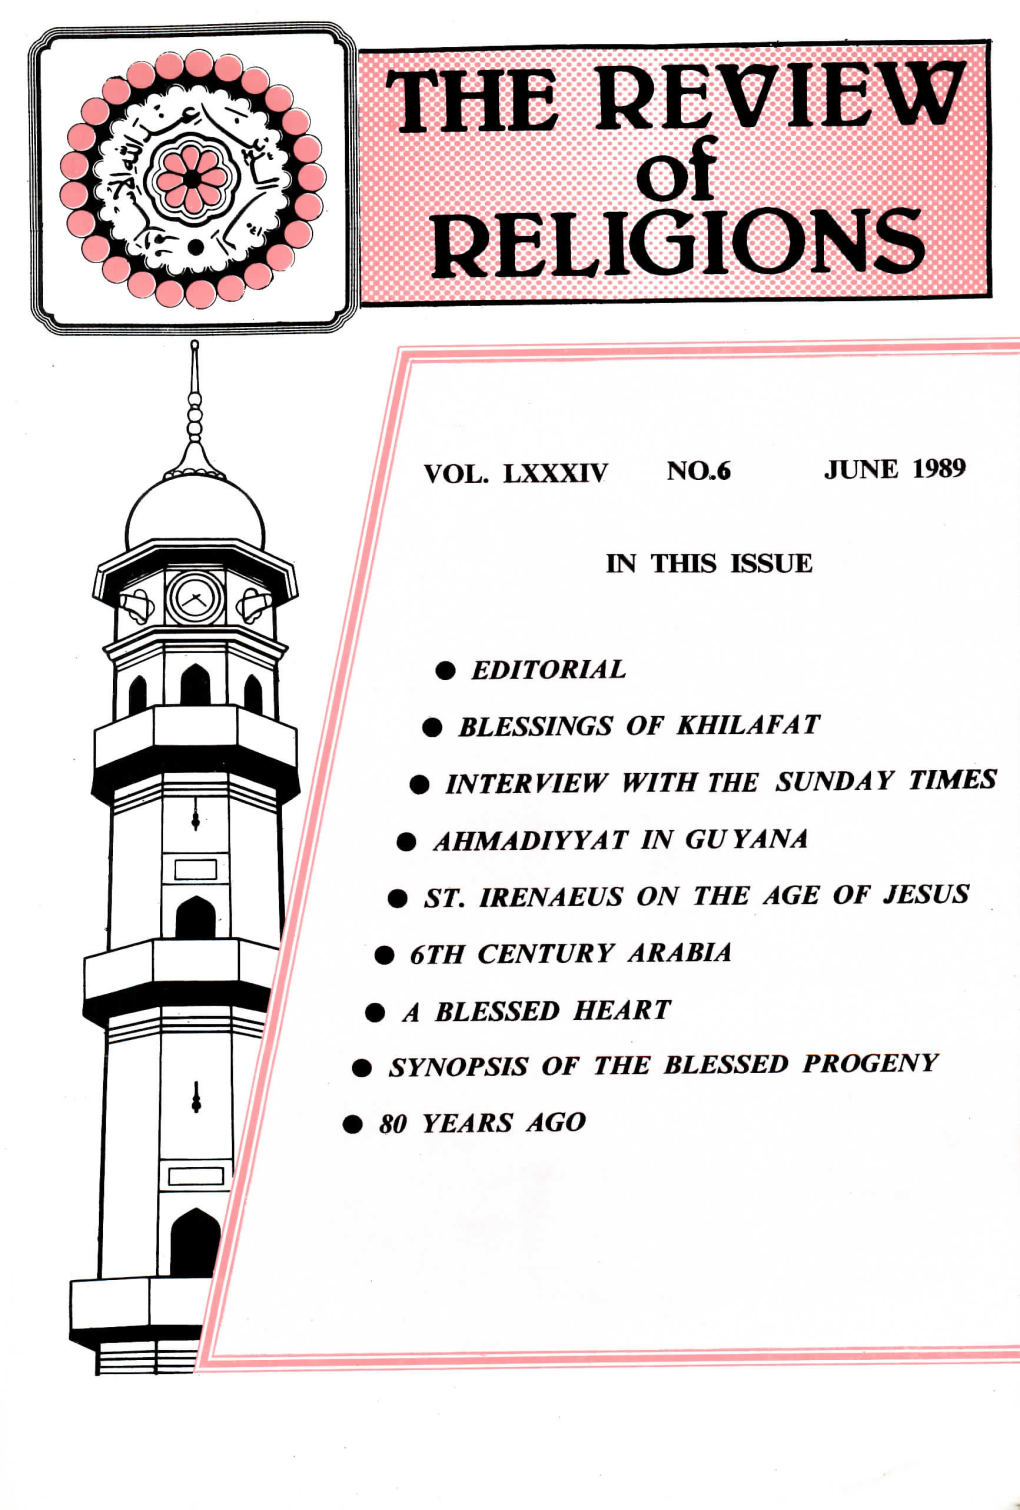 The Review of Religions June 1989